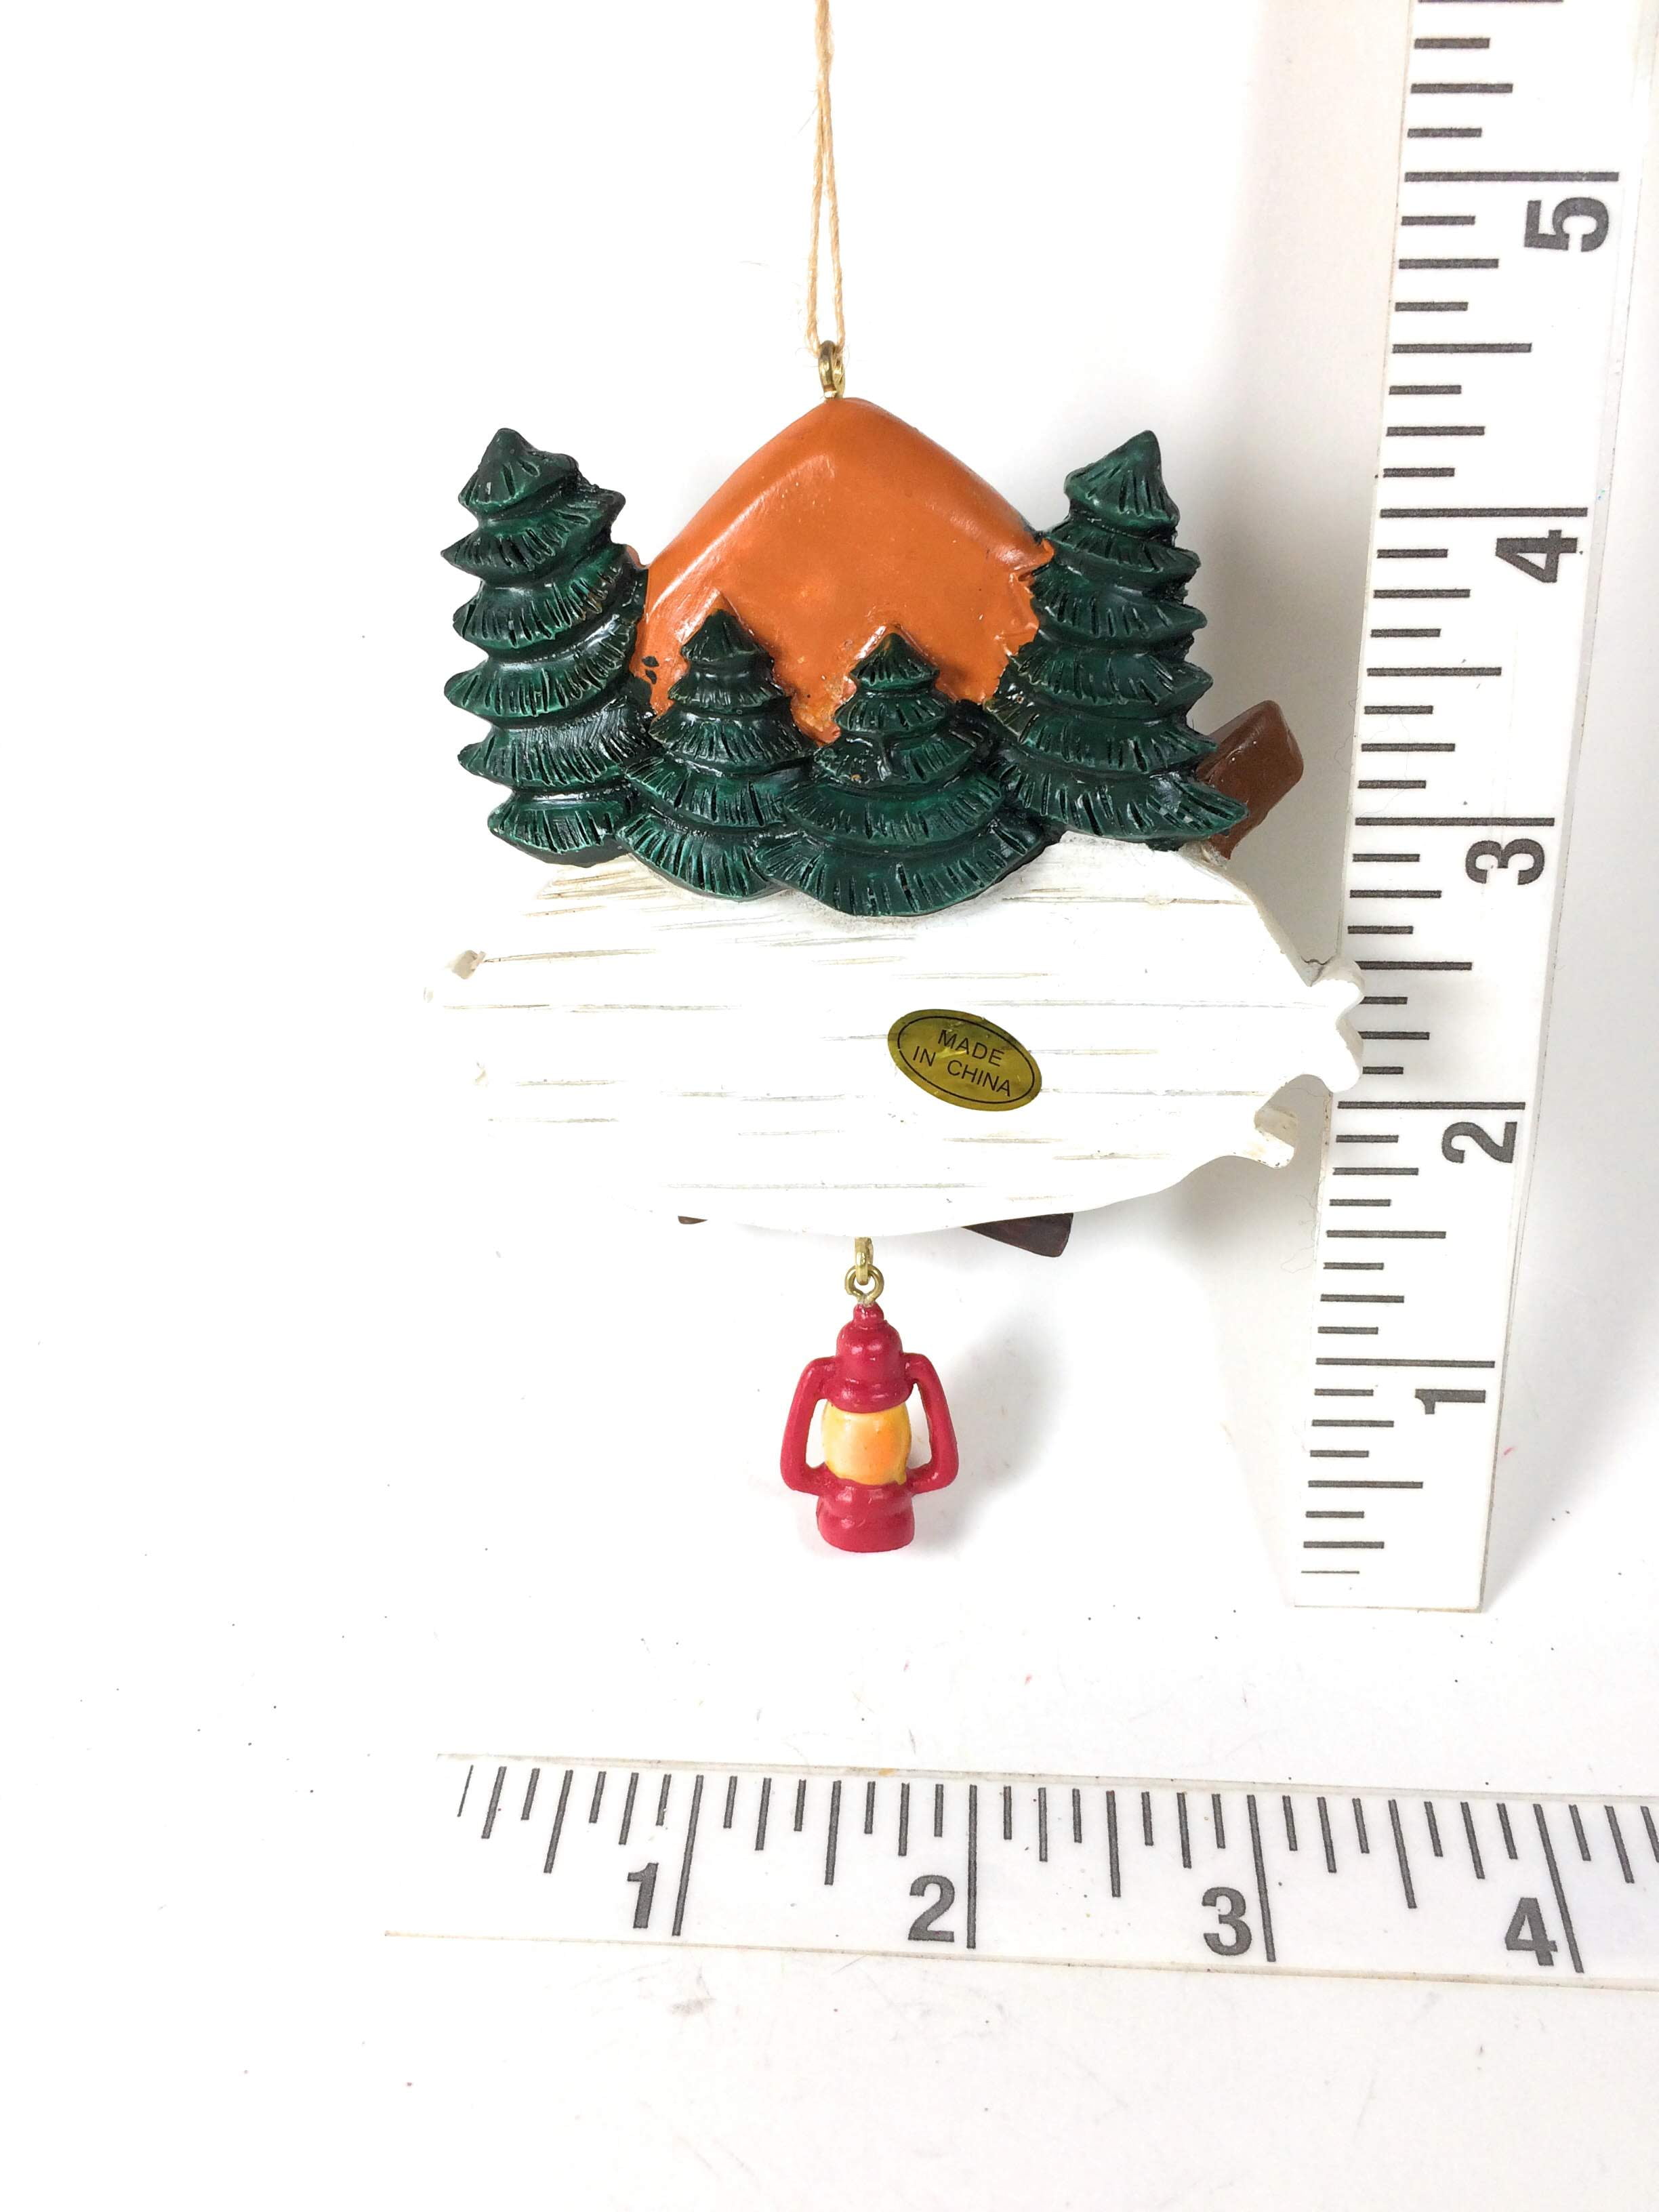 Midwest of Cannon Falls Santa Camping In Blue Pup Tent Christmas Tree Ornament 